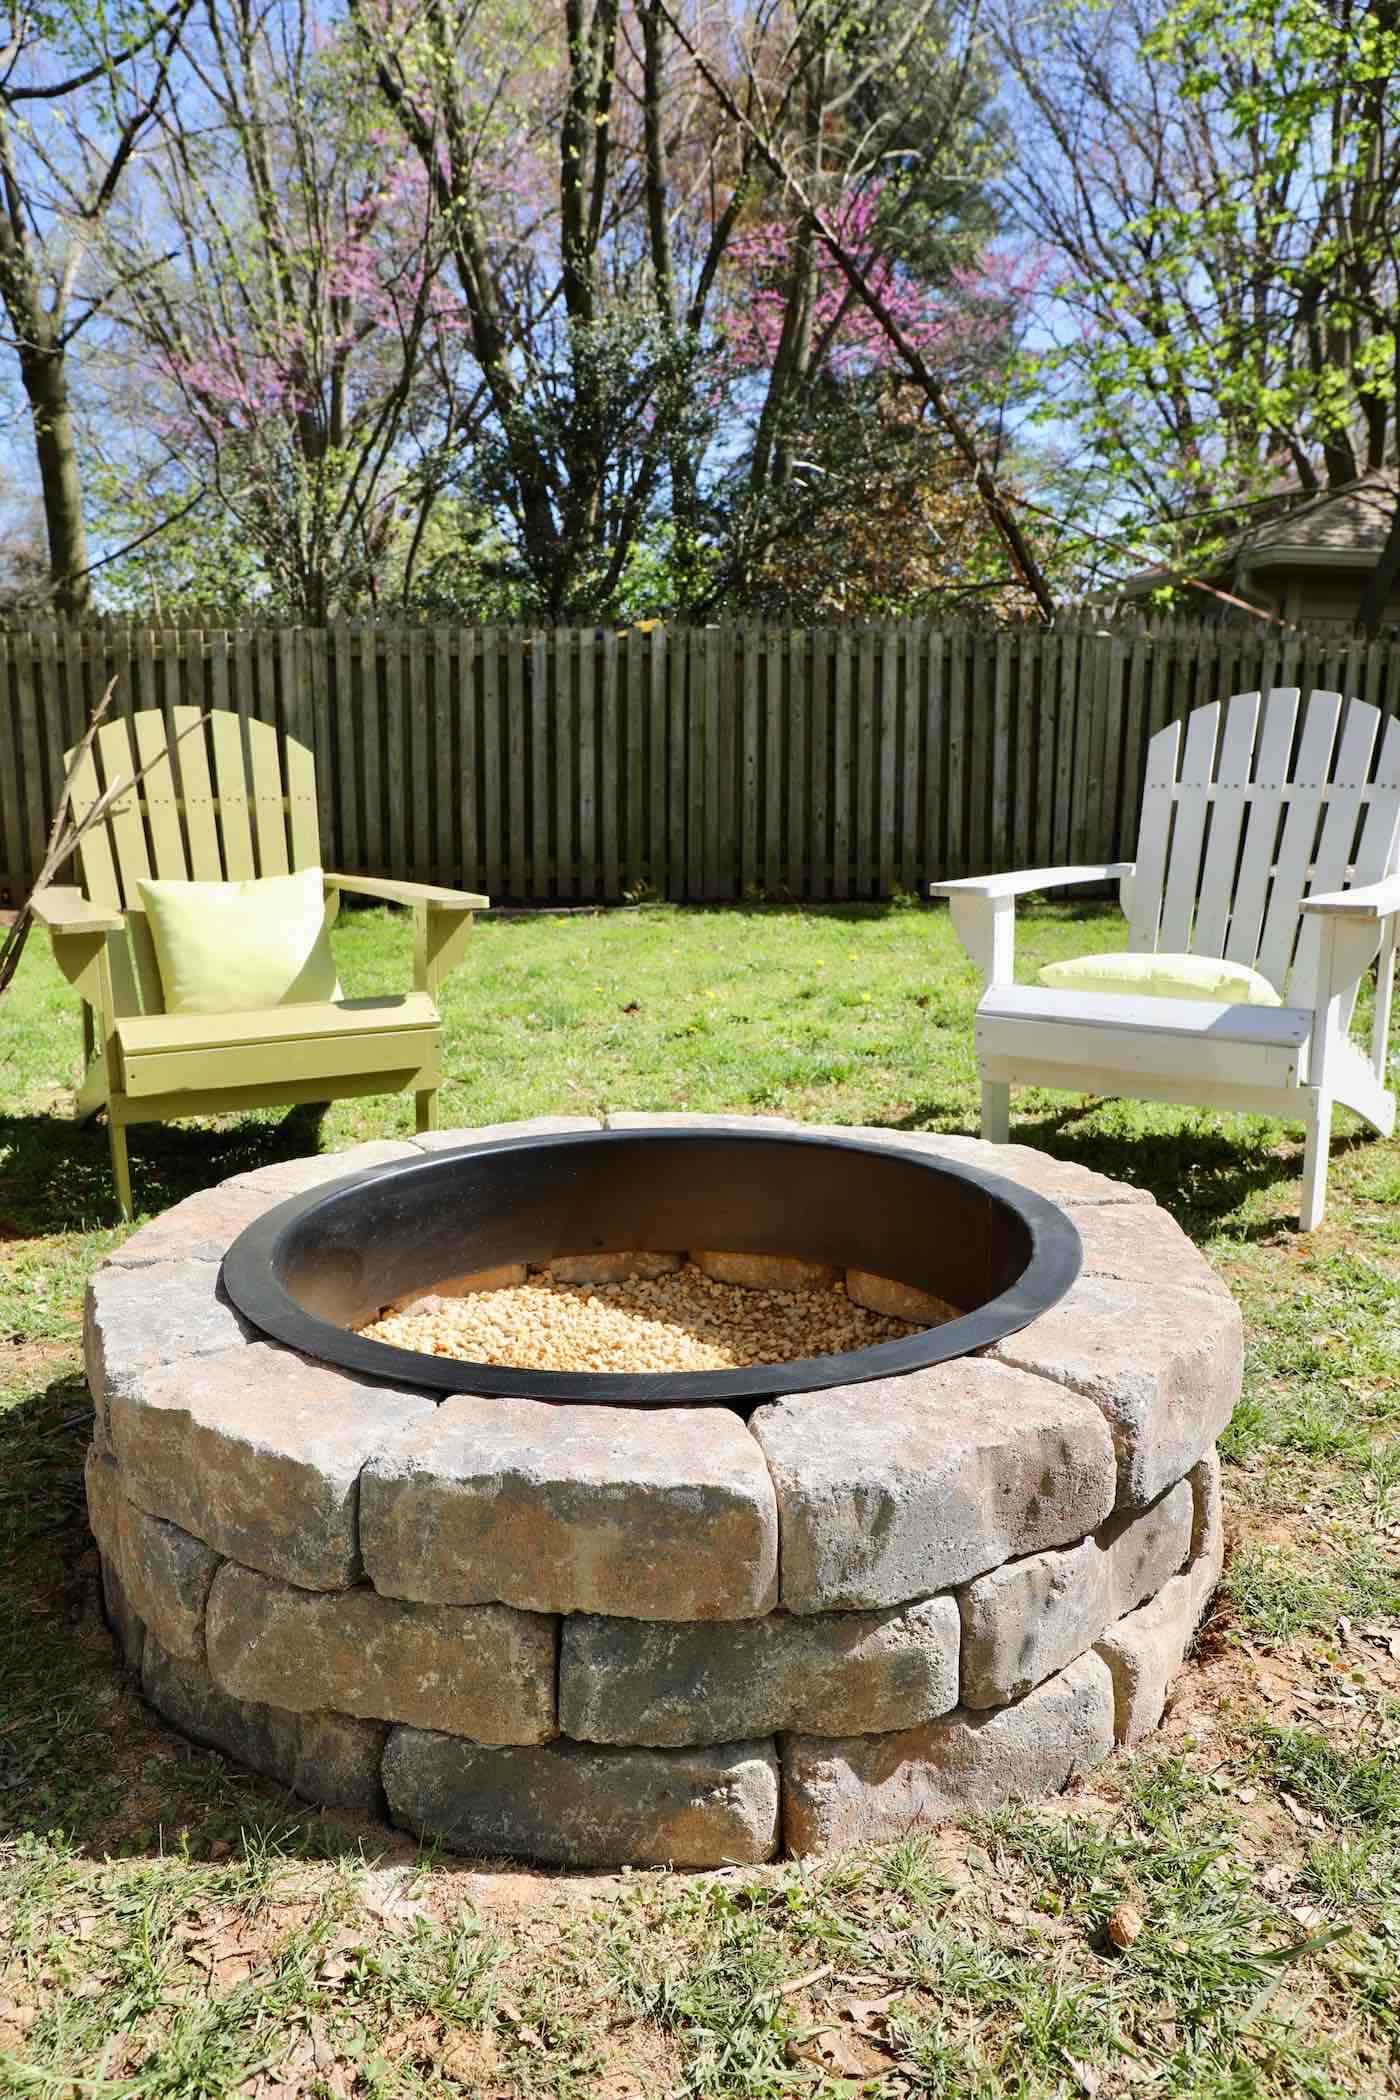 Diy Fire Pit With Gravel Stones, Images Of Fire Pits In Backyards